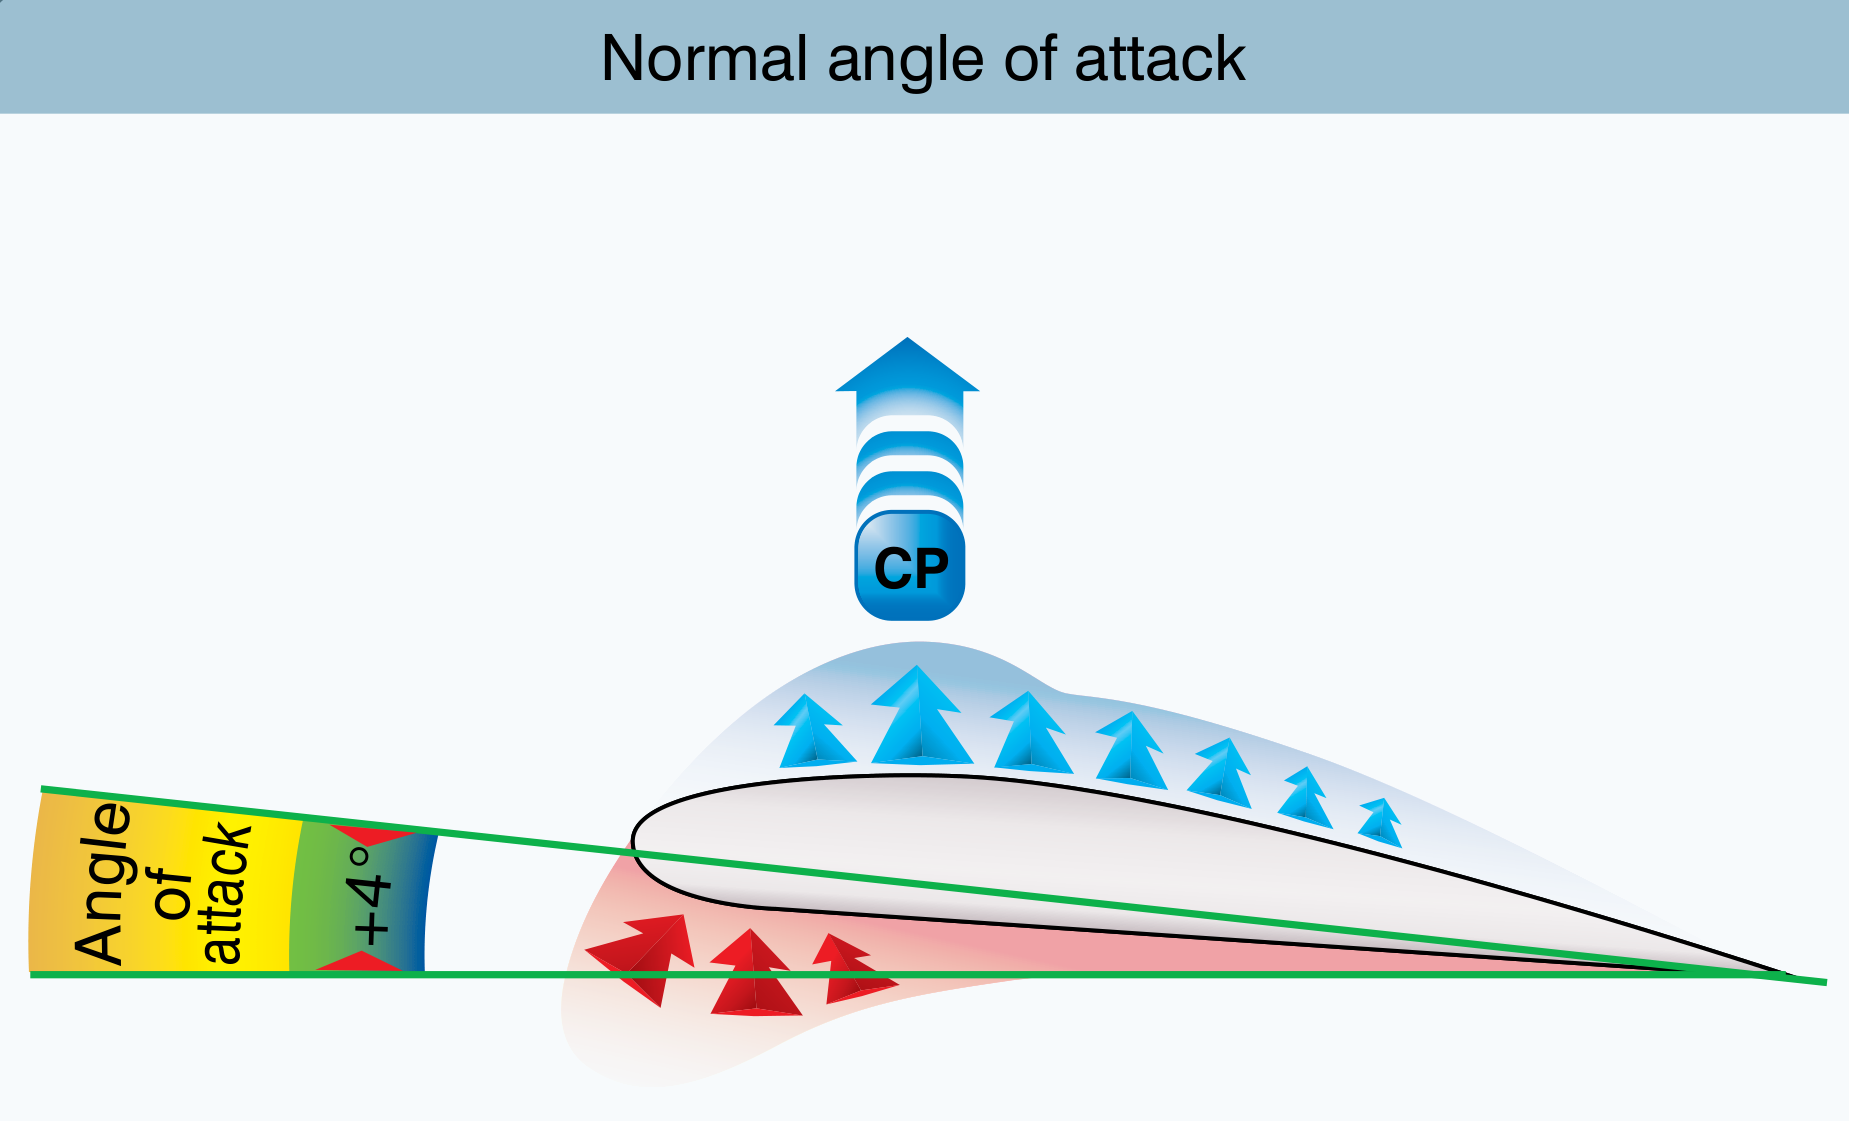 Airfoil pressure distribution at normal angles of attack.